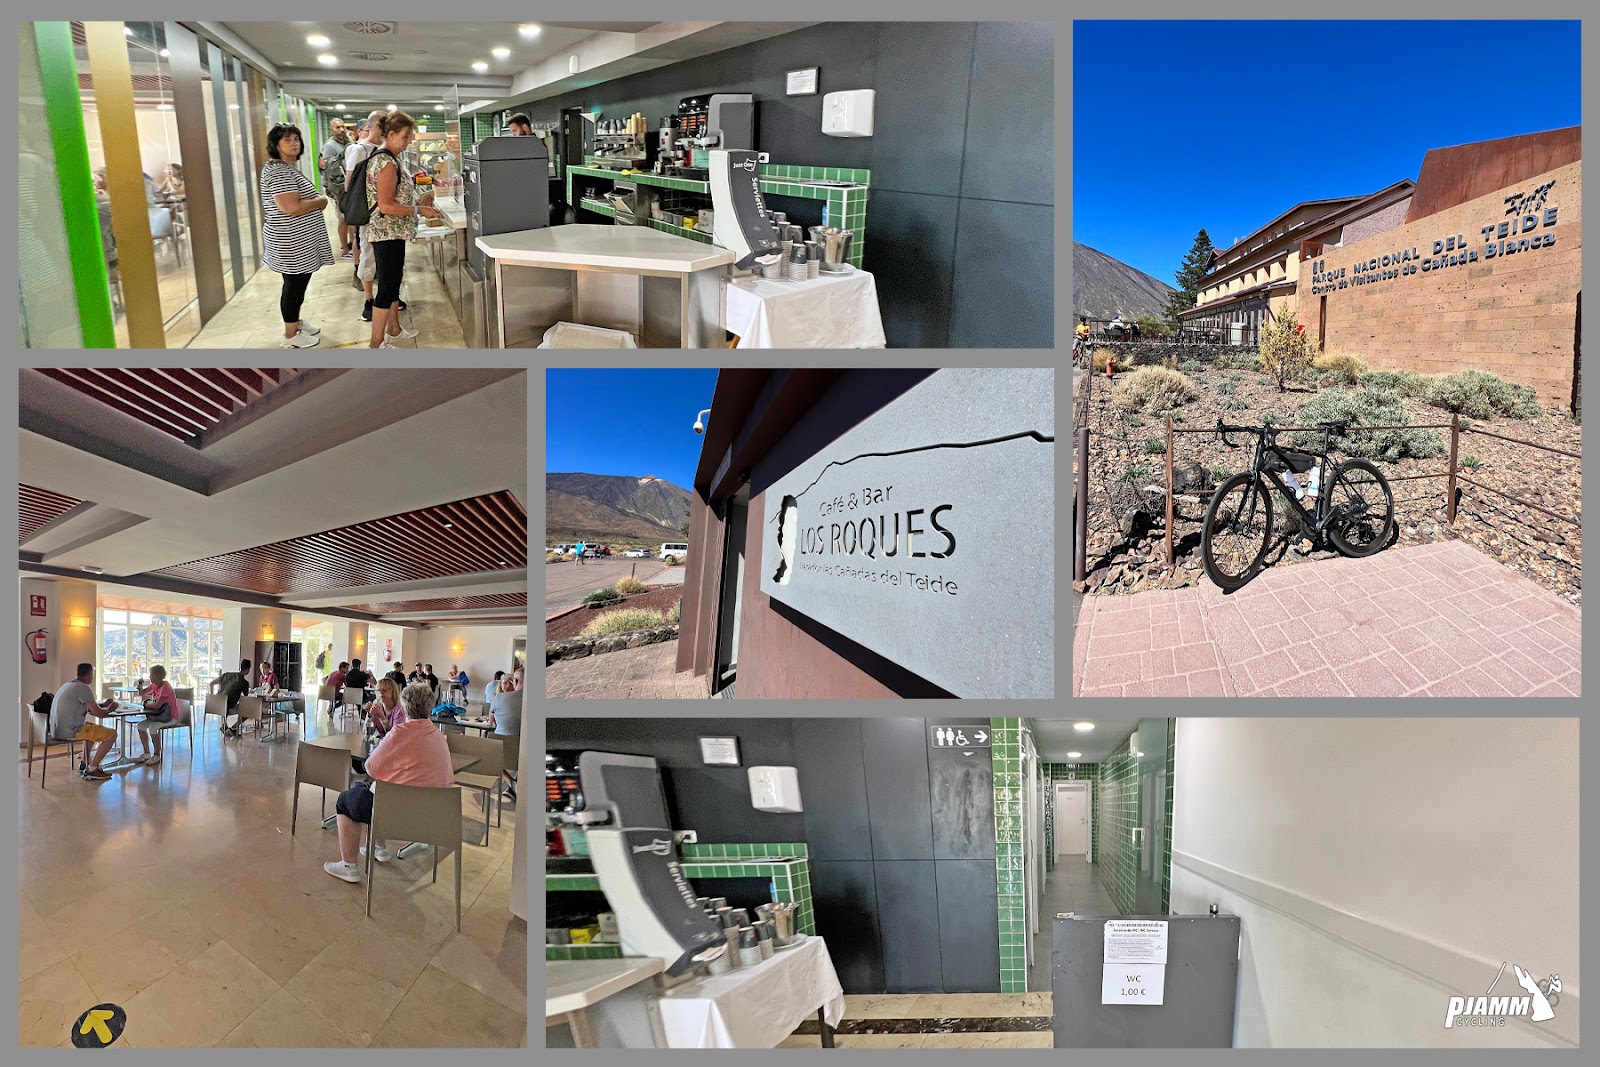 photo collage shows views inside and outside of Teide Visitor Center